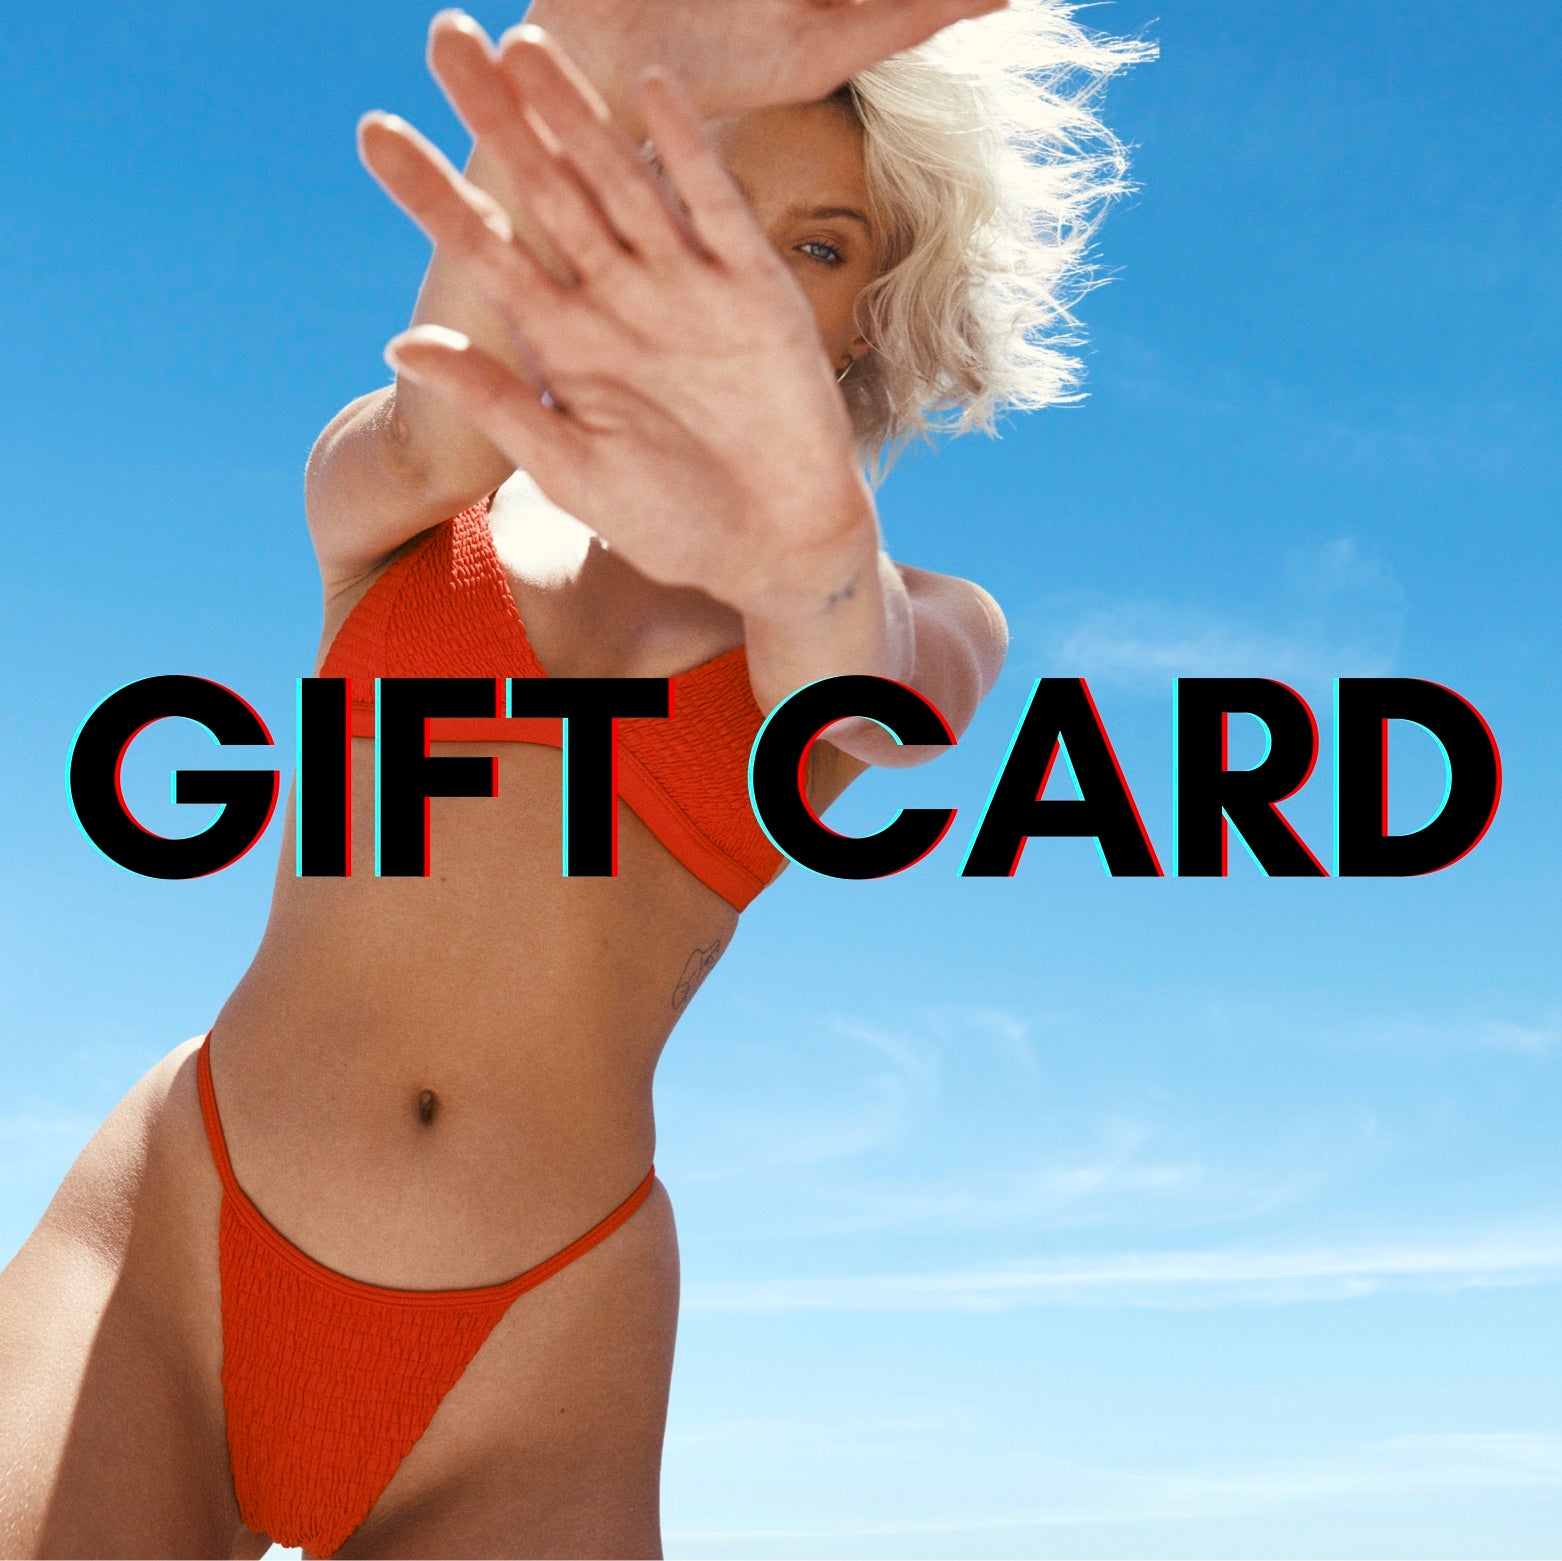 The Ultimate Gift Card